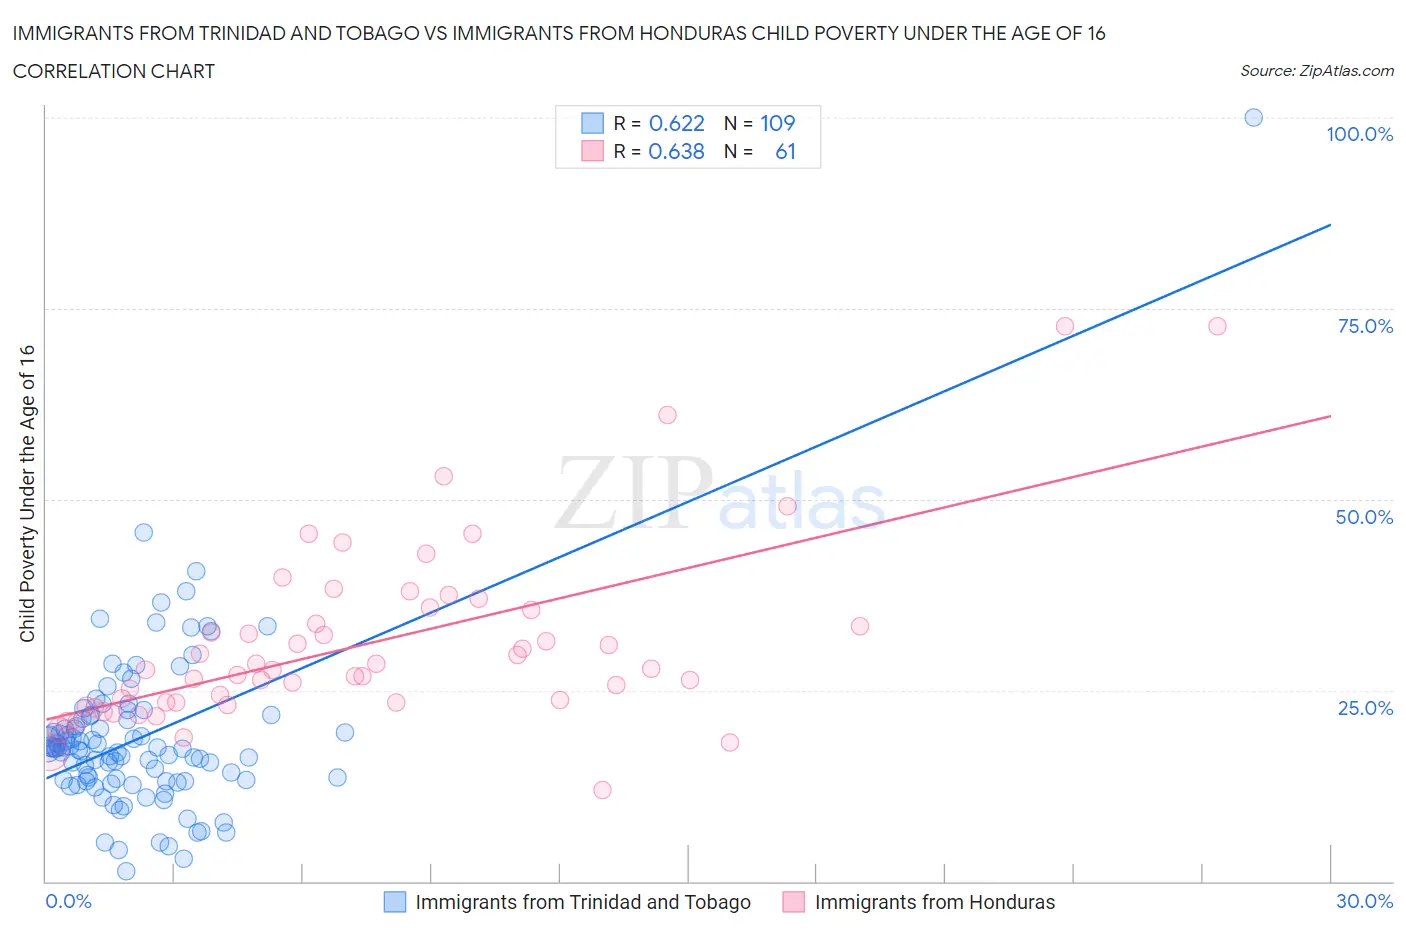 Immigrants from Trinidad and Tobago vs Immigrants from Honduras Child Poverty Under the Age of 16